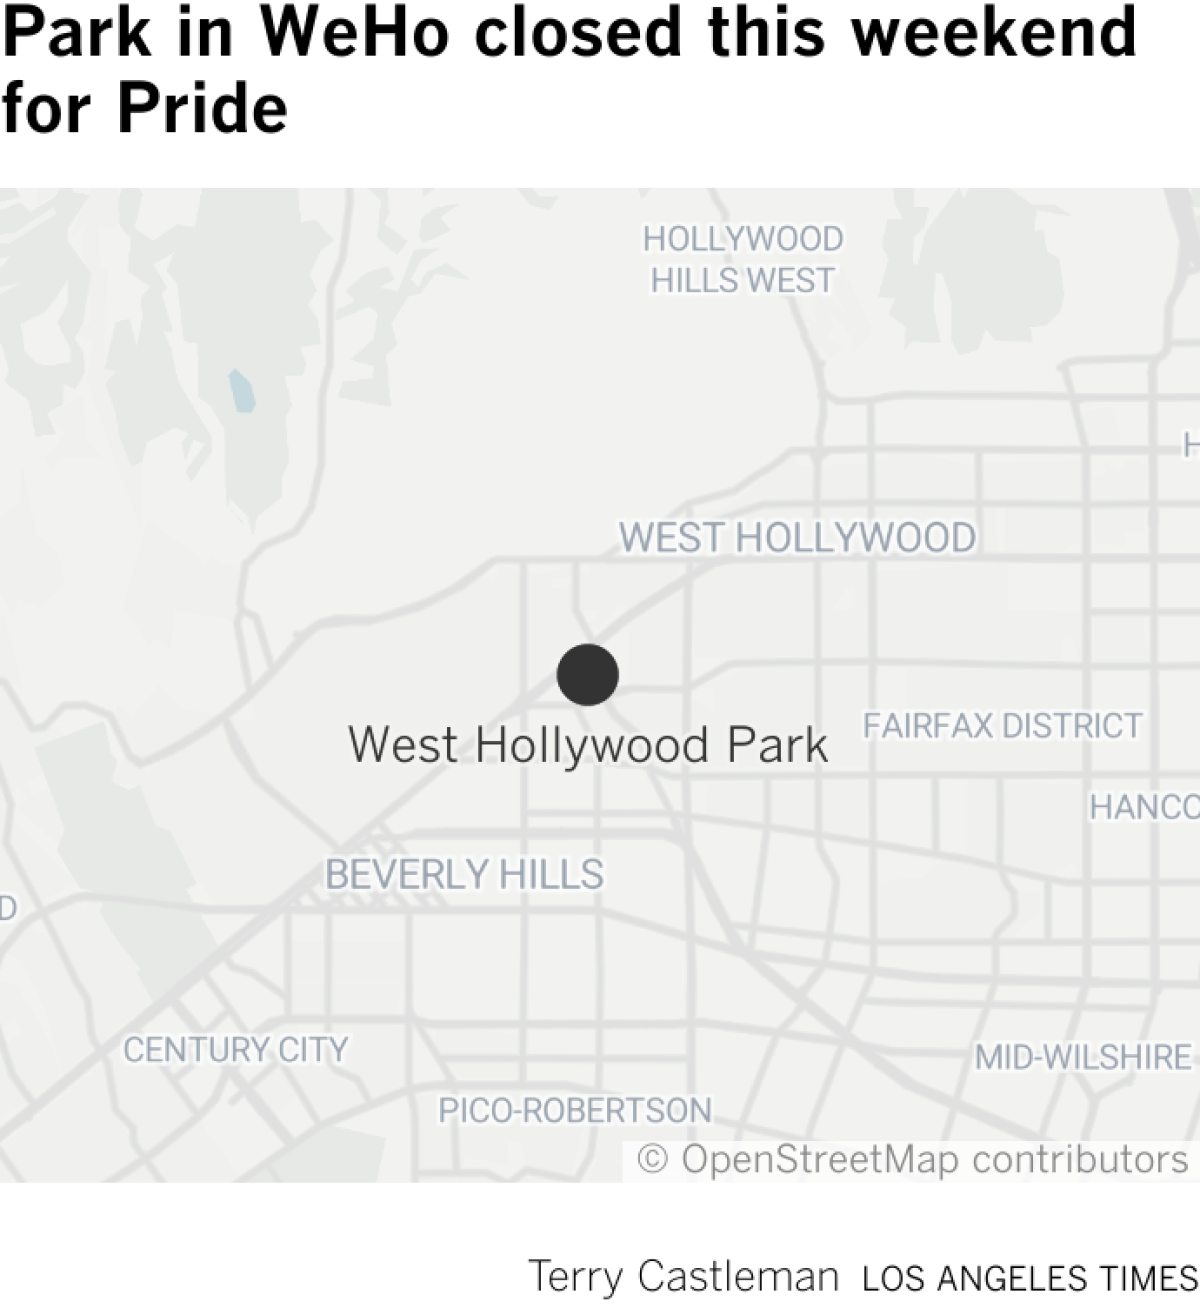 Map showing West Hollywood Park, which is closed this weekend.